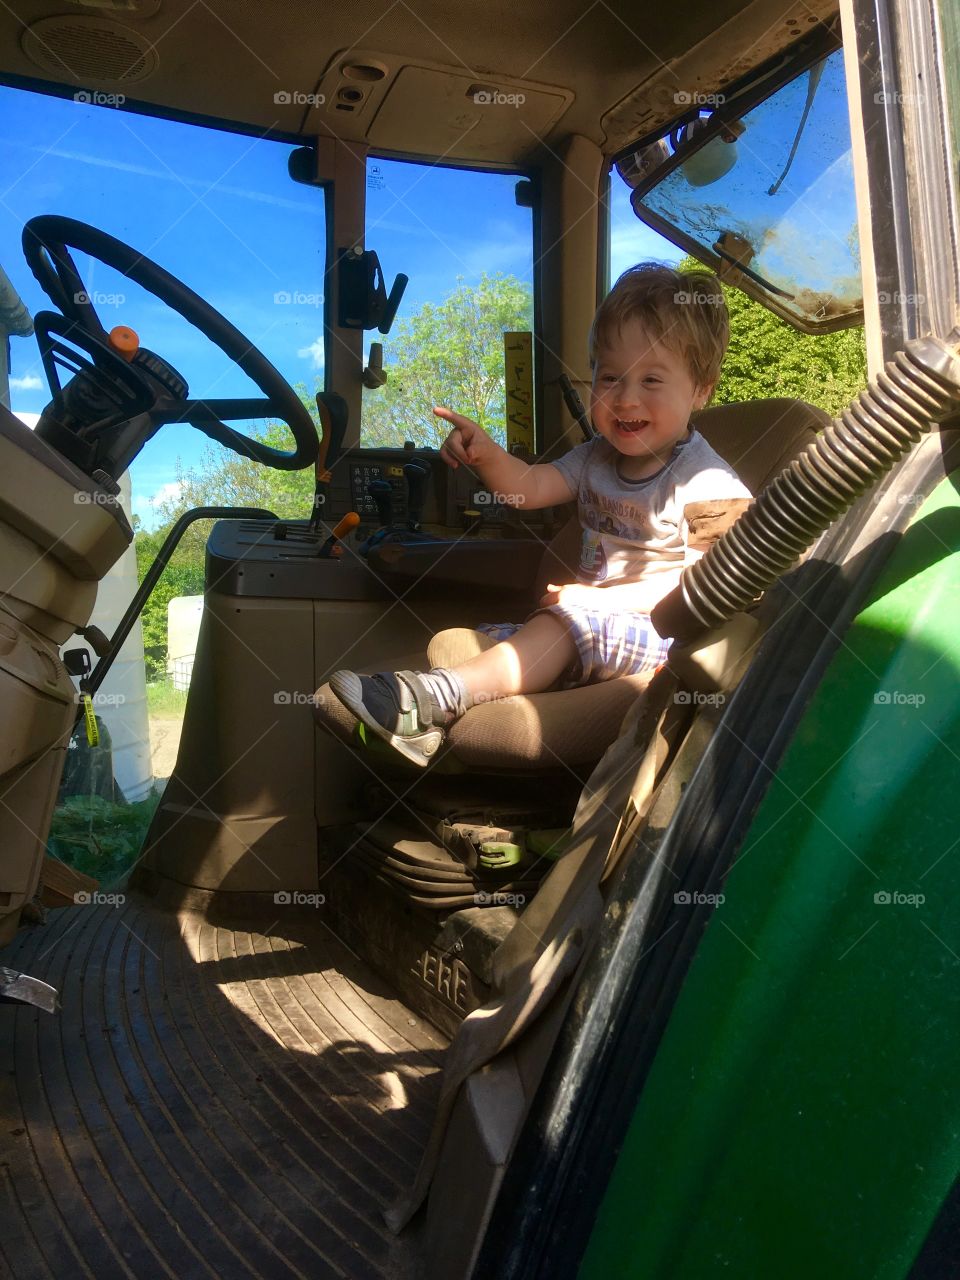 Toddler sitting in a green tractor, so pleased to be there. A genuine working tractor 